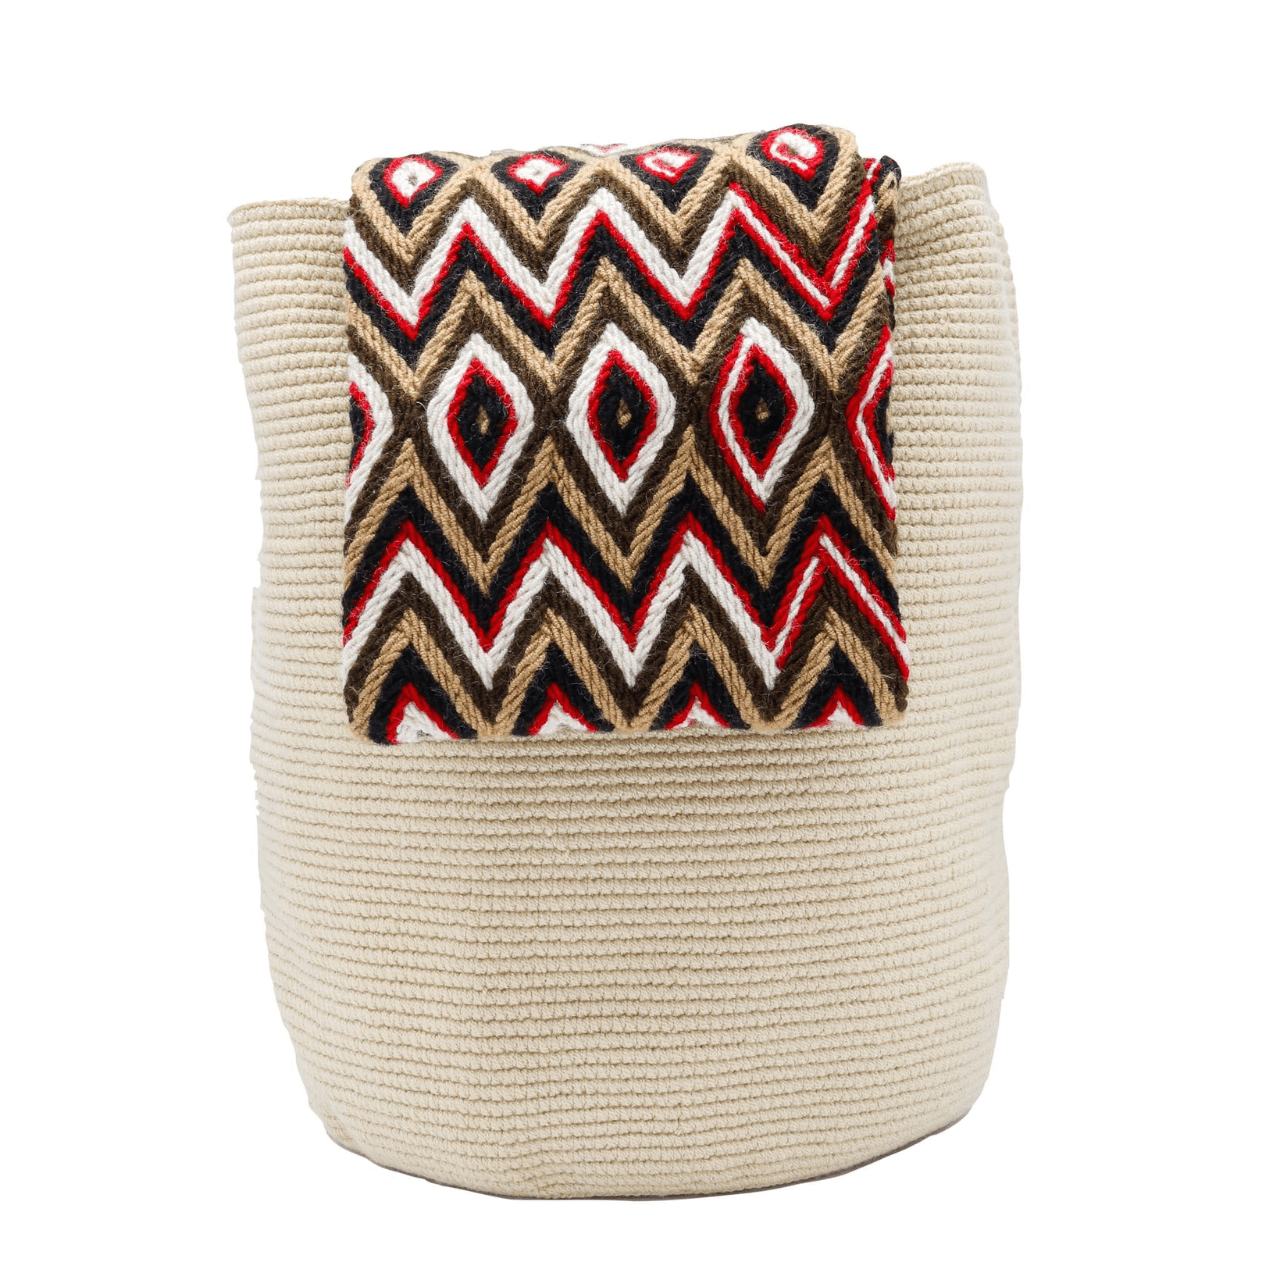 Solid beige  Ece crochet bucket bag with a stunning wide strap in vibrant red, black, and beige hues, adding an elegant touch to the design.